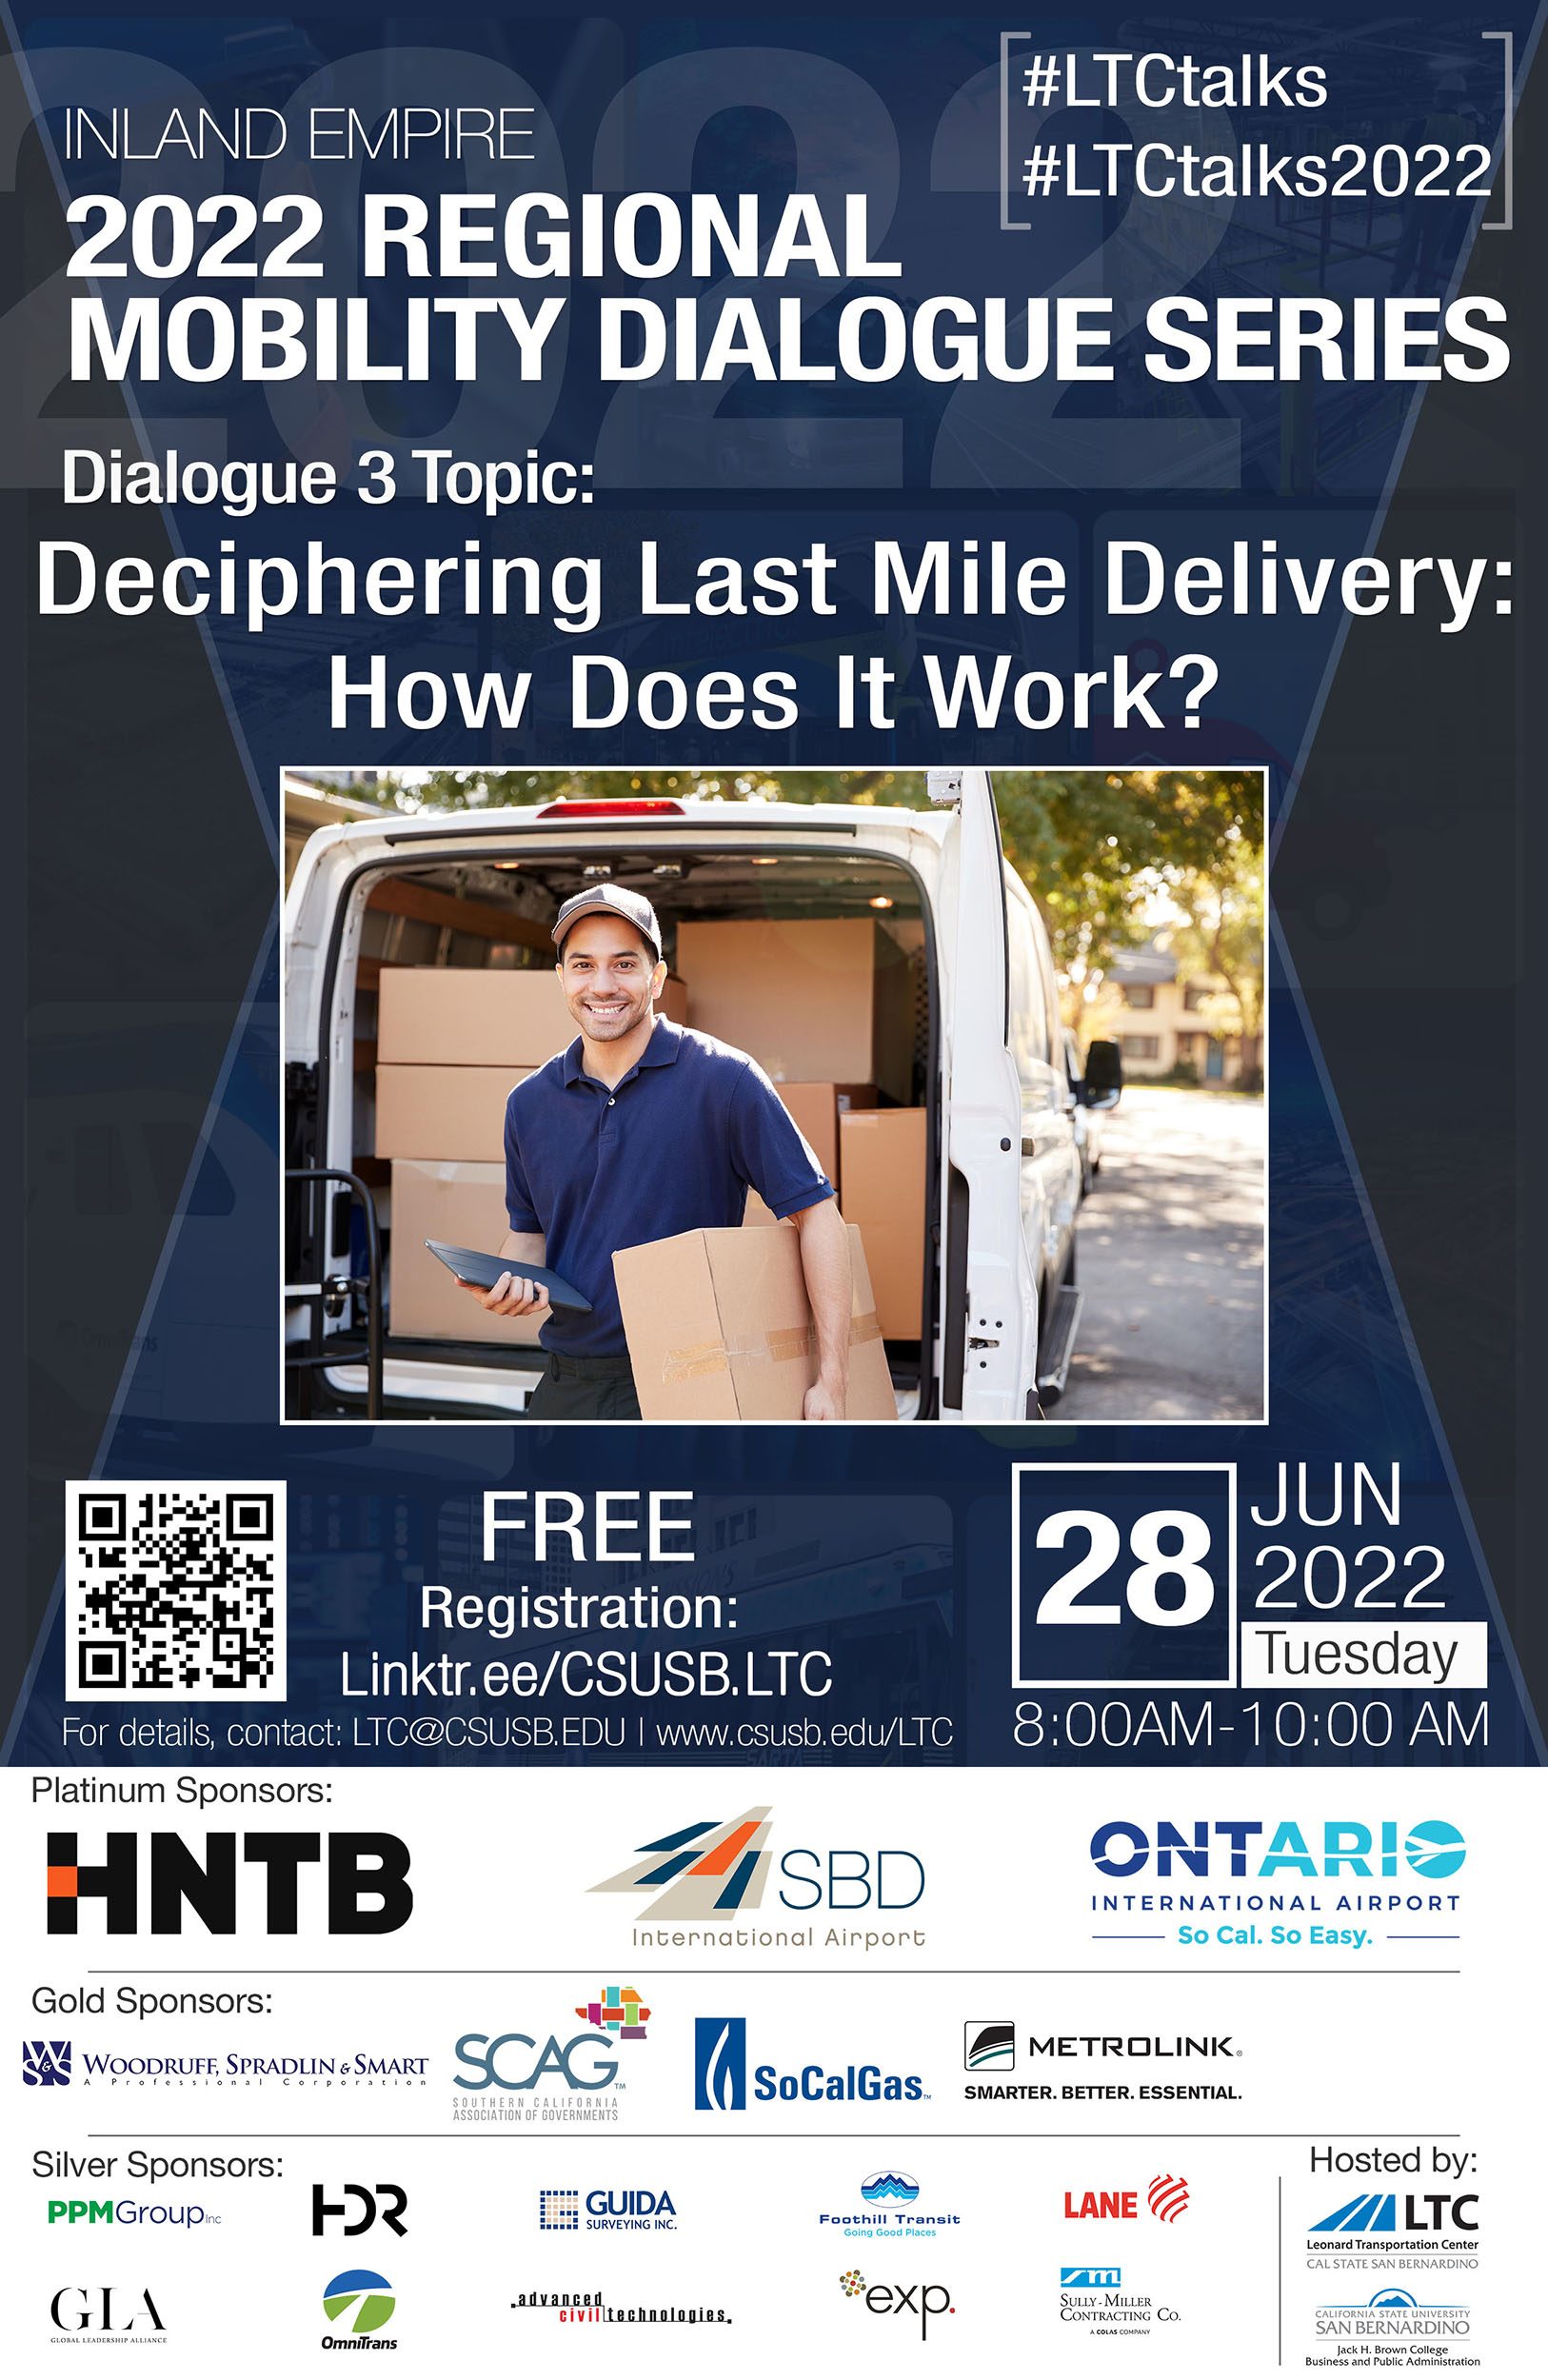 Dialogue 3: Deciphering Last Mile Delivery: How Does It Work?